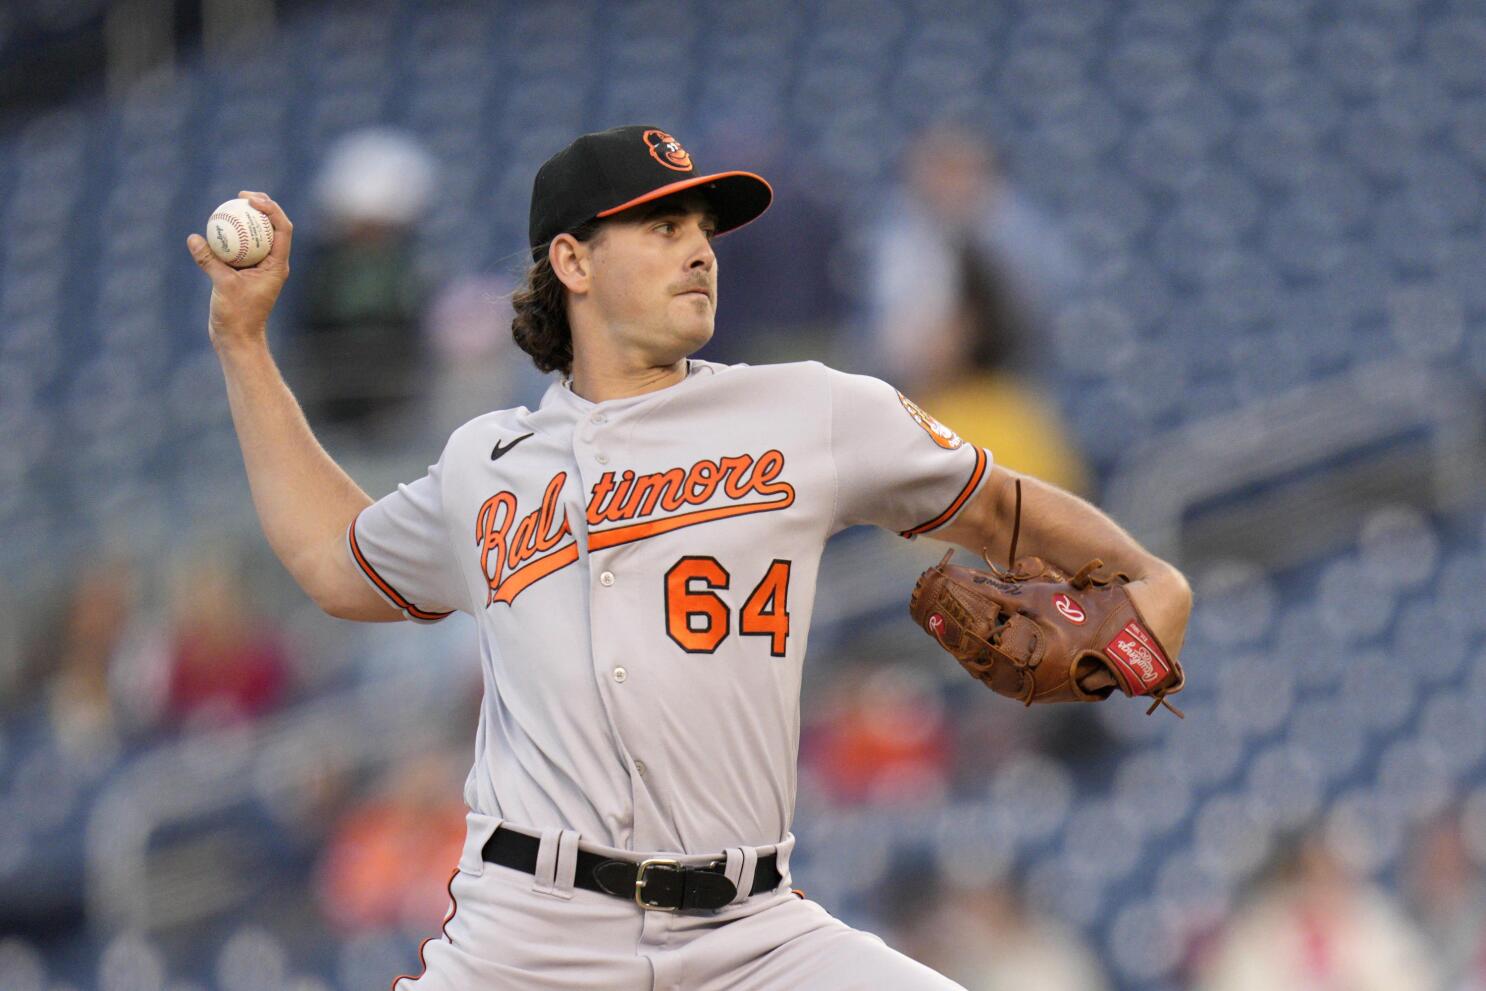 After spoiling another perfect game, Orioles fall apart in 6-1 loss, National Sports